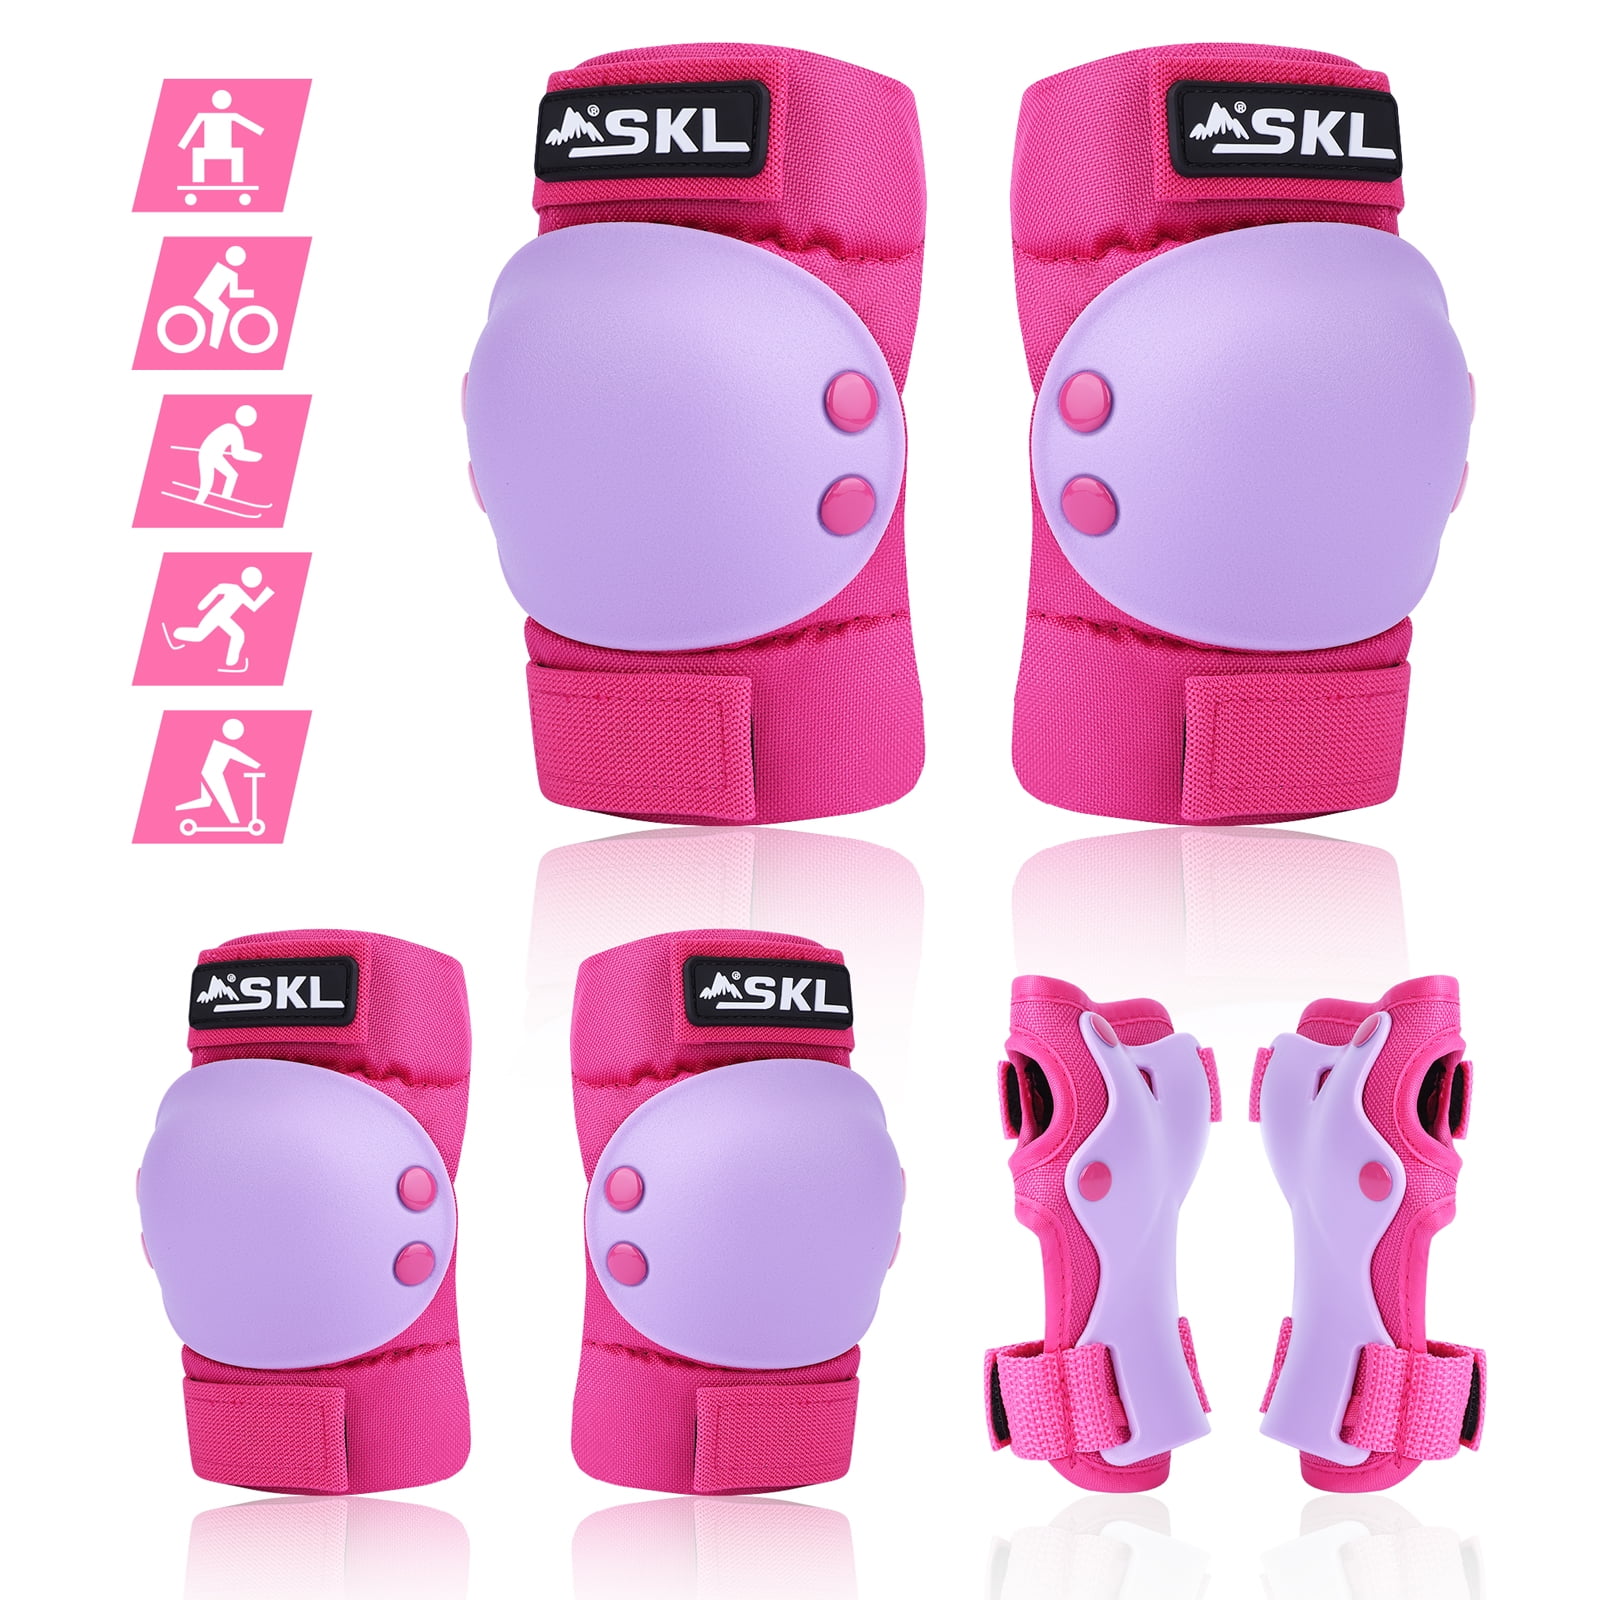 Details about   Disney Junior Minnie Protective Gear and Bicycle Bell Knee Elbow pads ages 3-7 